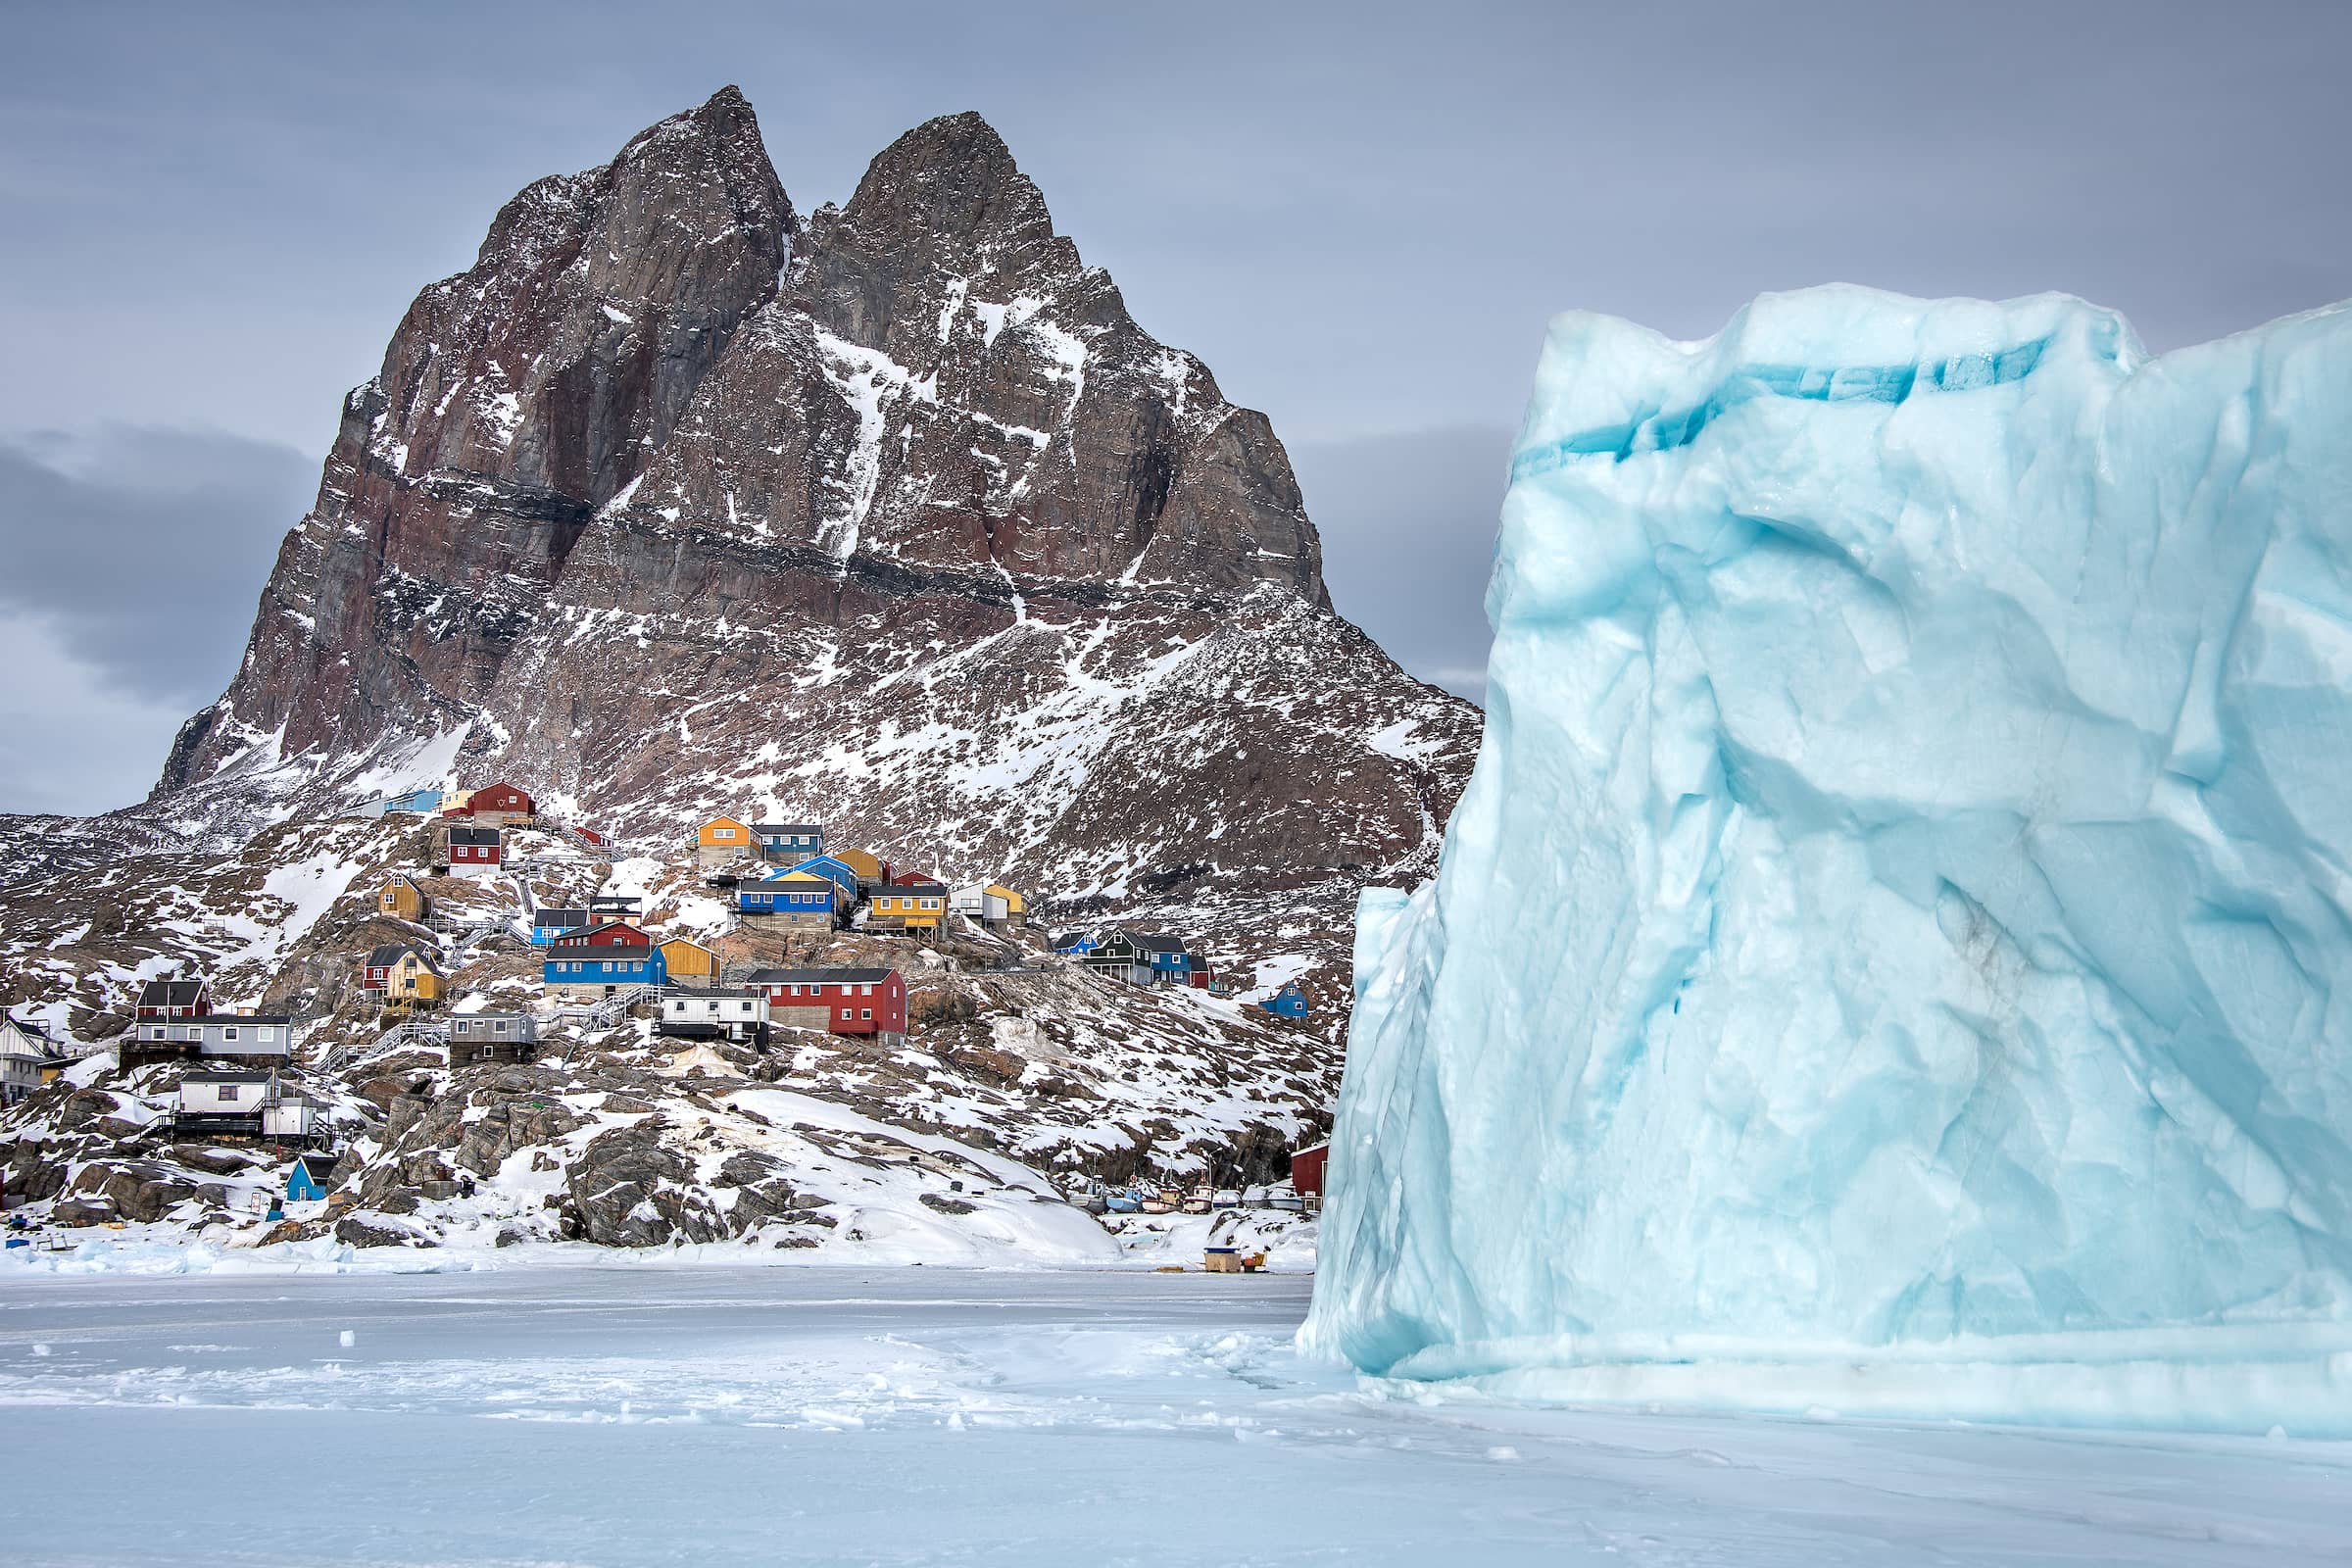 A winter view of the heart shaped mountain and the town of Uummannaq in North Greenland. Photo by Marcela Cardenas - Visit Greenland